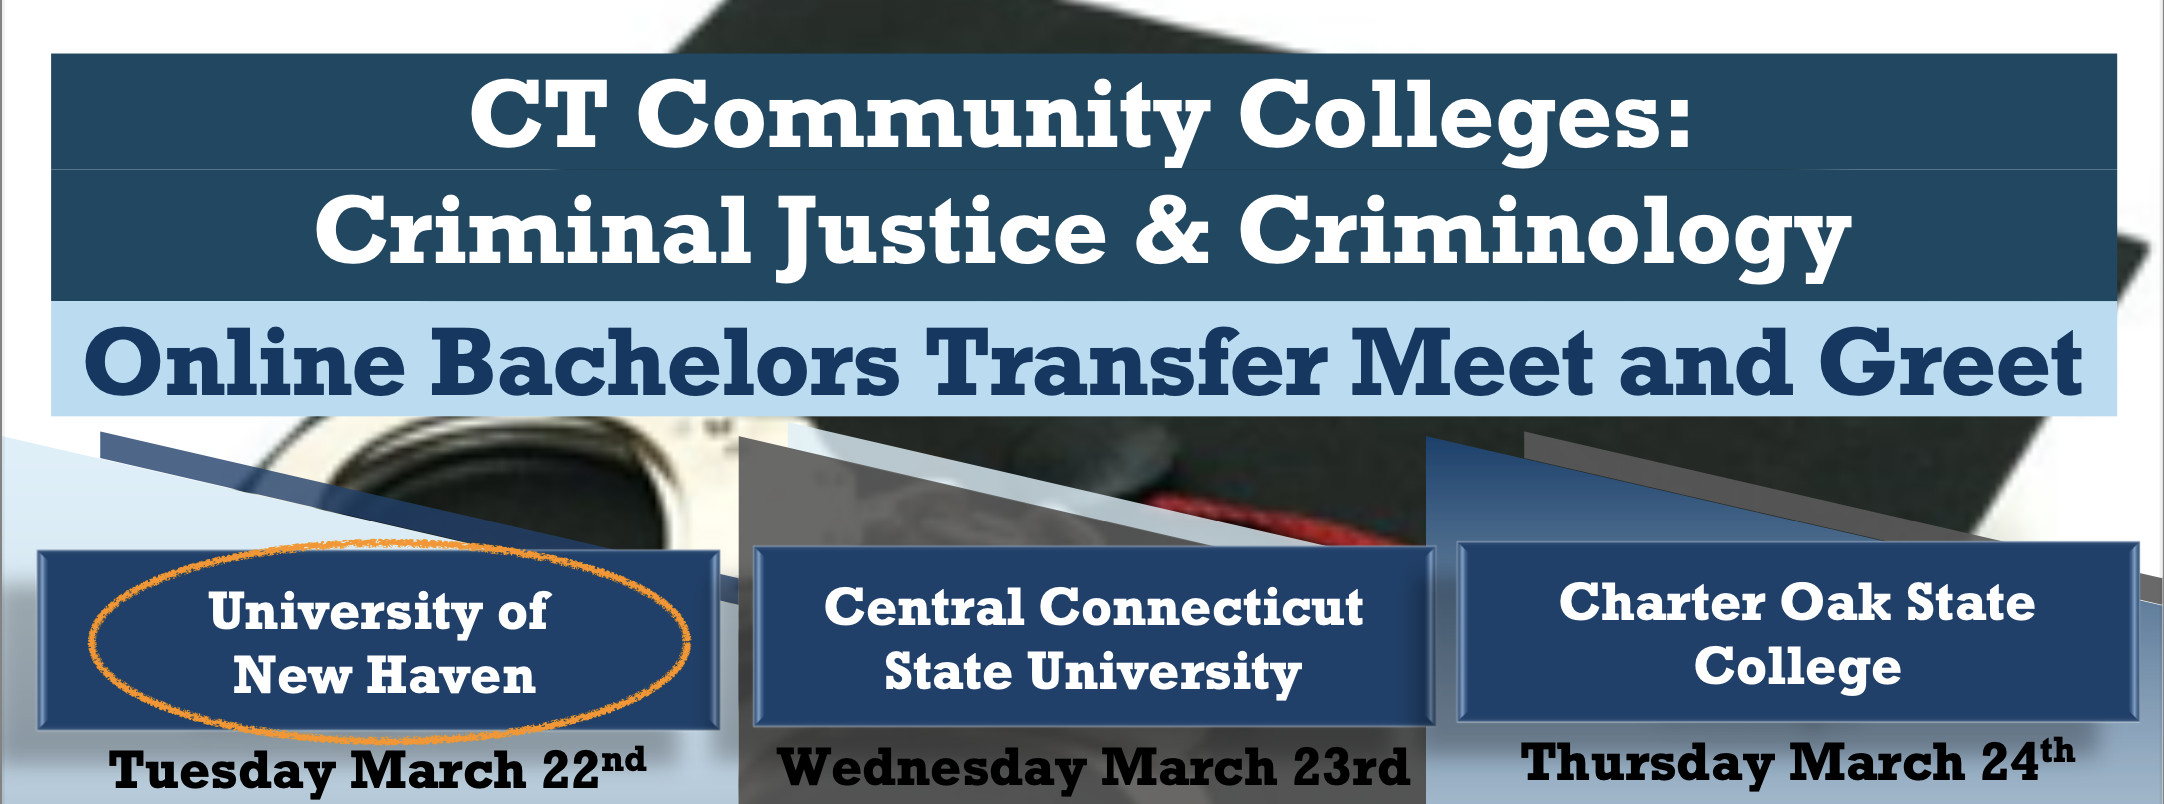 Header for University of New Haven's portion of the CT Community College Colleges Criminal Justice & Criminology Online Bachelors Transfer Meet and Greet on March 22, 2022